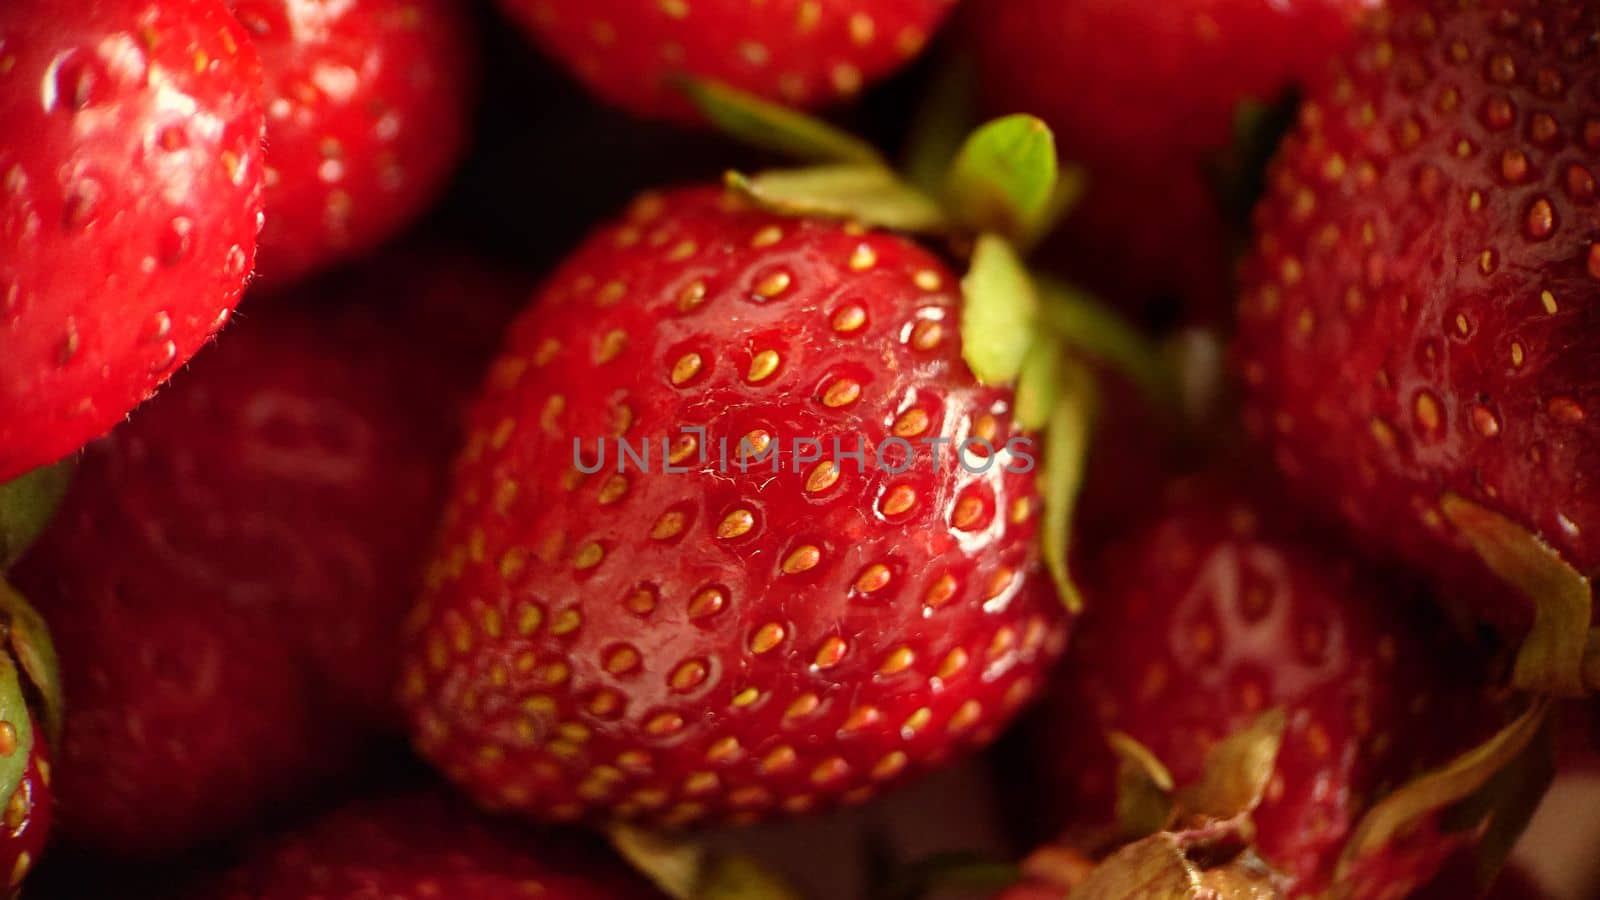 Background image of ripe juicy strawberries in close-up.Macro photography.Texture or background.Selective focus.